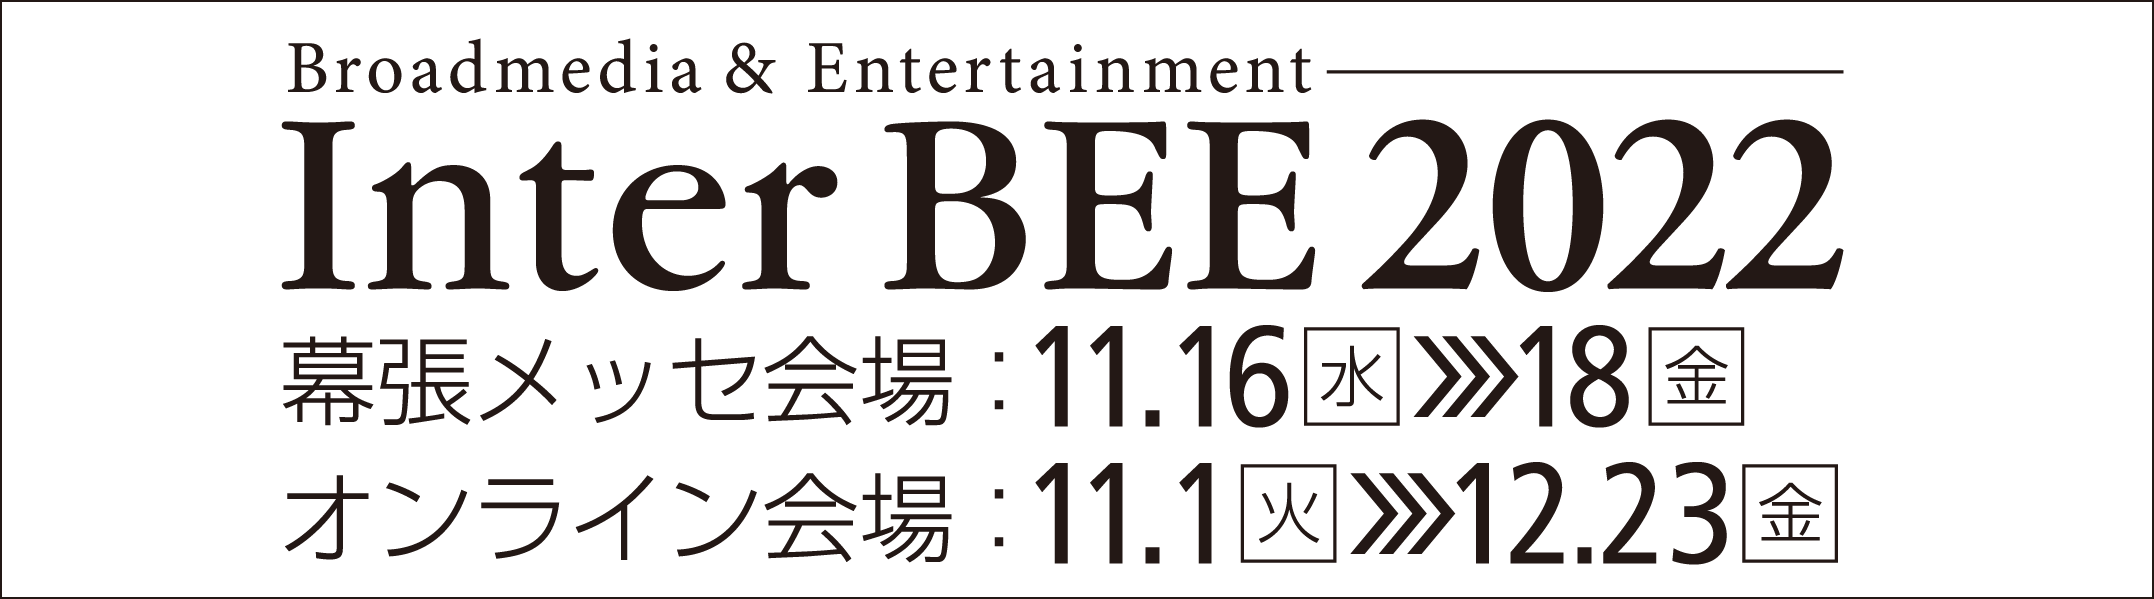 title_InterBEE_2022.png